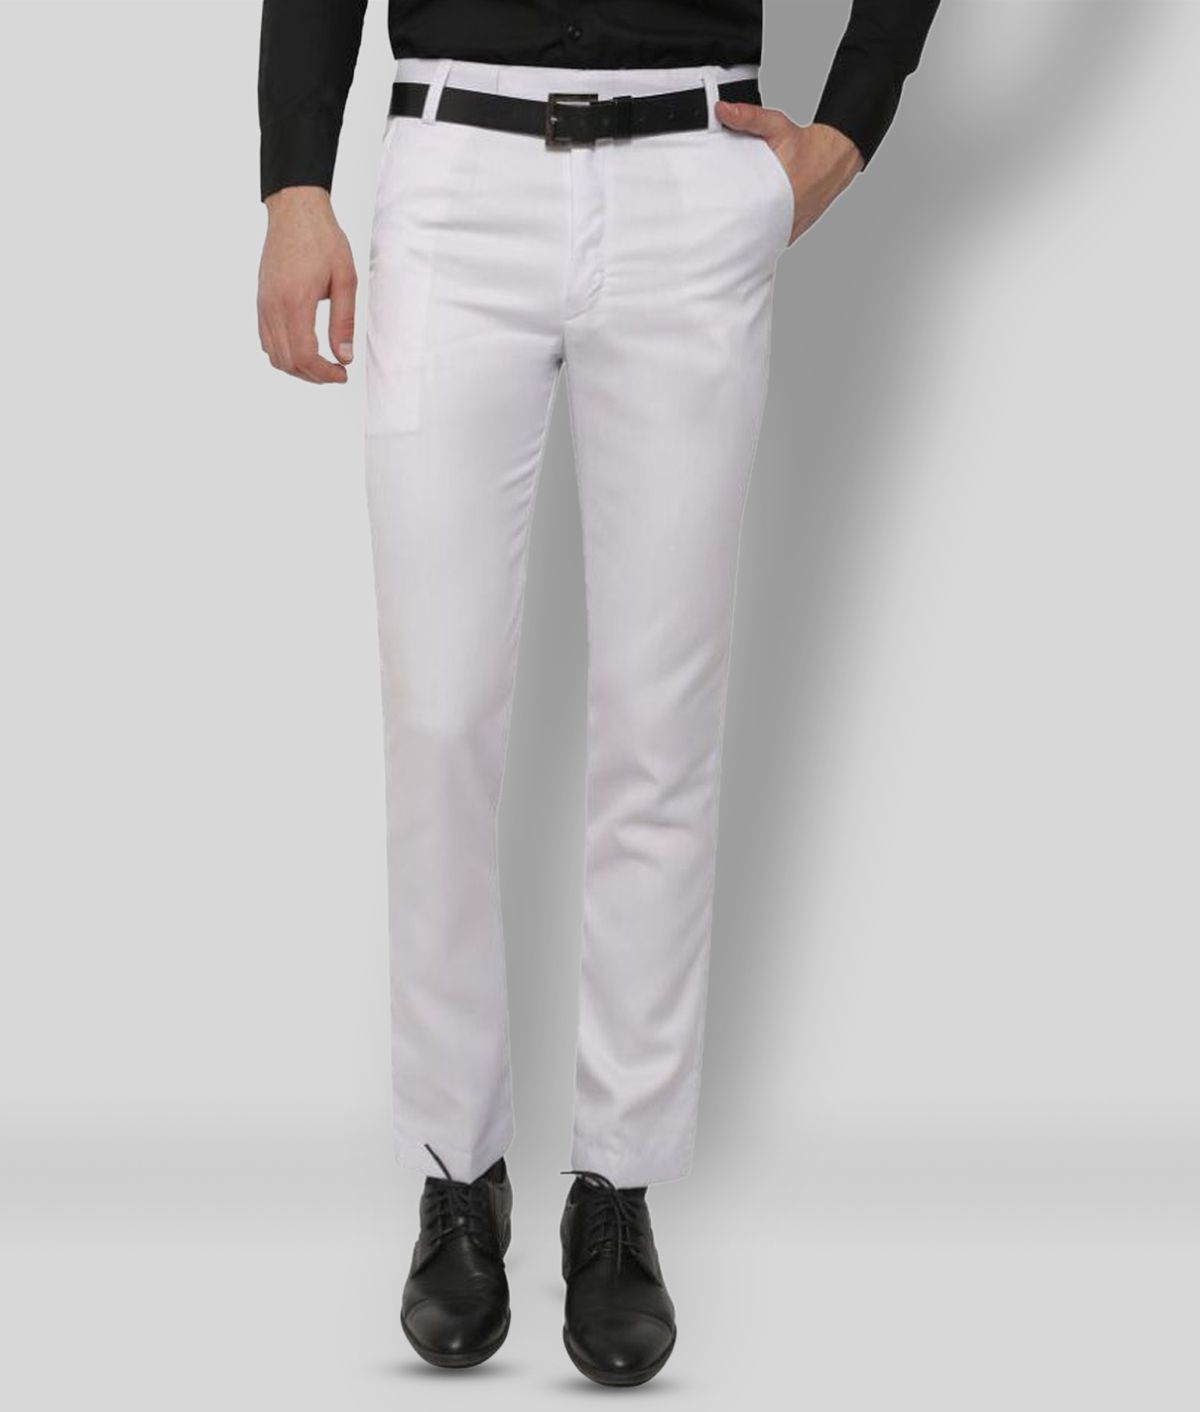     			Inspire Clothing Inspiration - White Polycotton Slim - Fit Men's Chinos ( Pack of 1 )